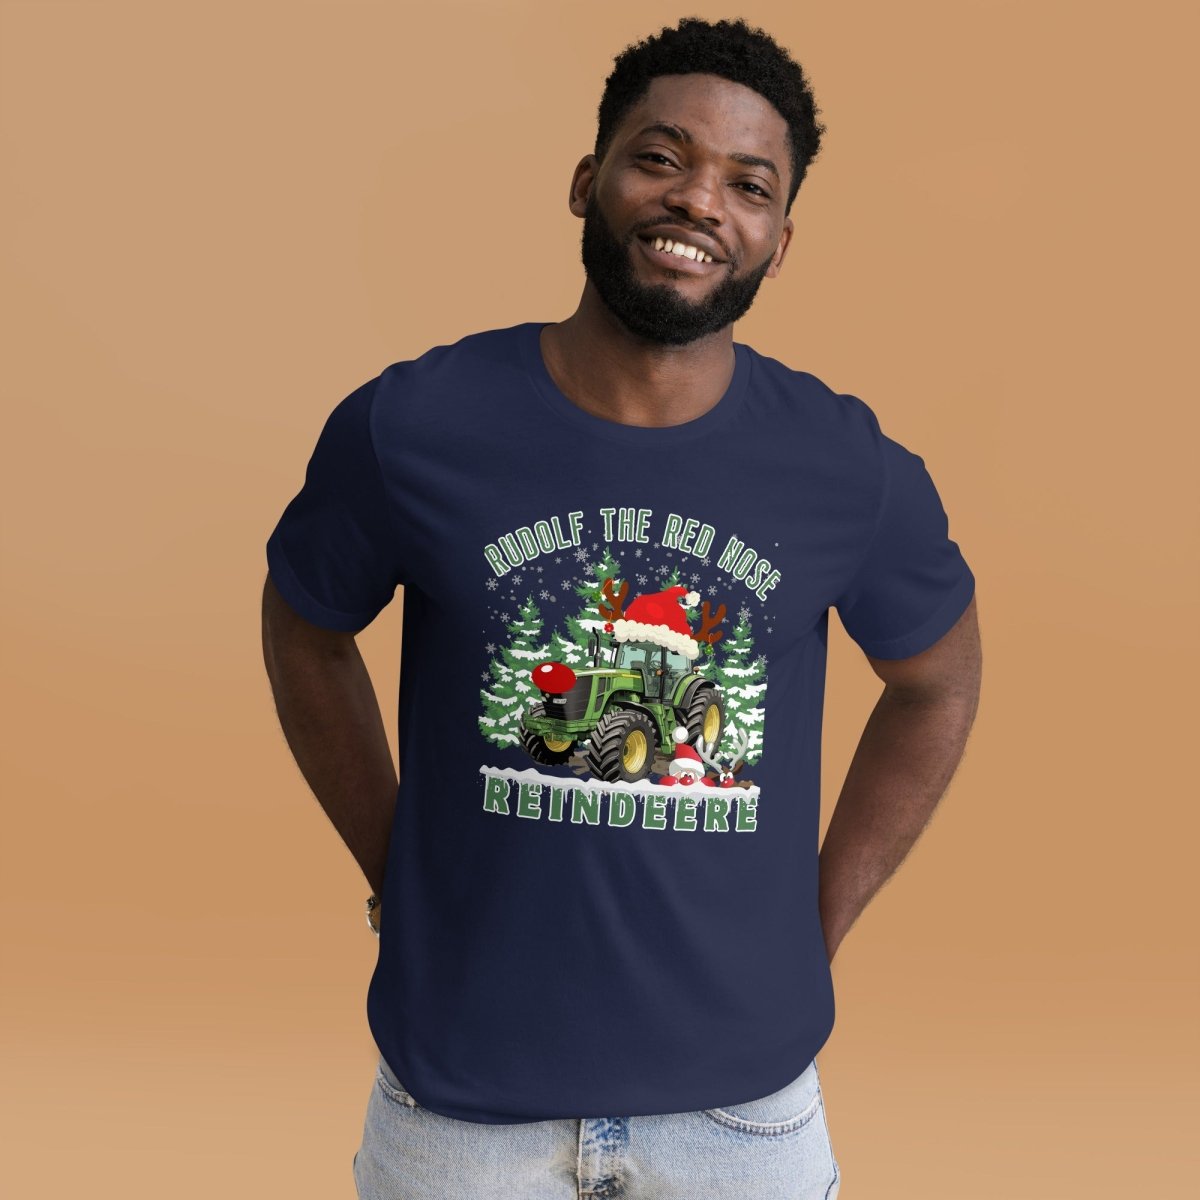 Farmer Christmas T-Shirt - High Quality Green Tractor Shirt, Funny Gift for Farmer, Rudolf the Red Nose Reindeer, Gift for Tractor Lover - Everything Pixel